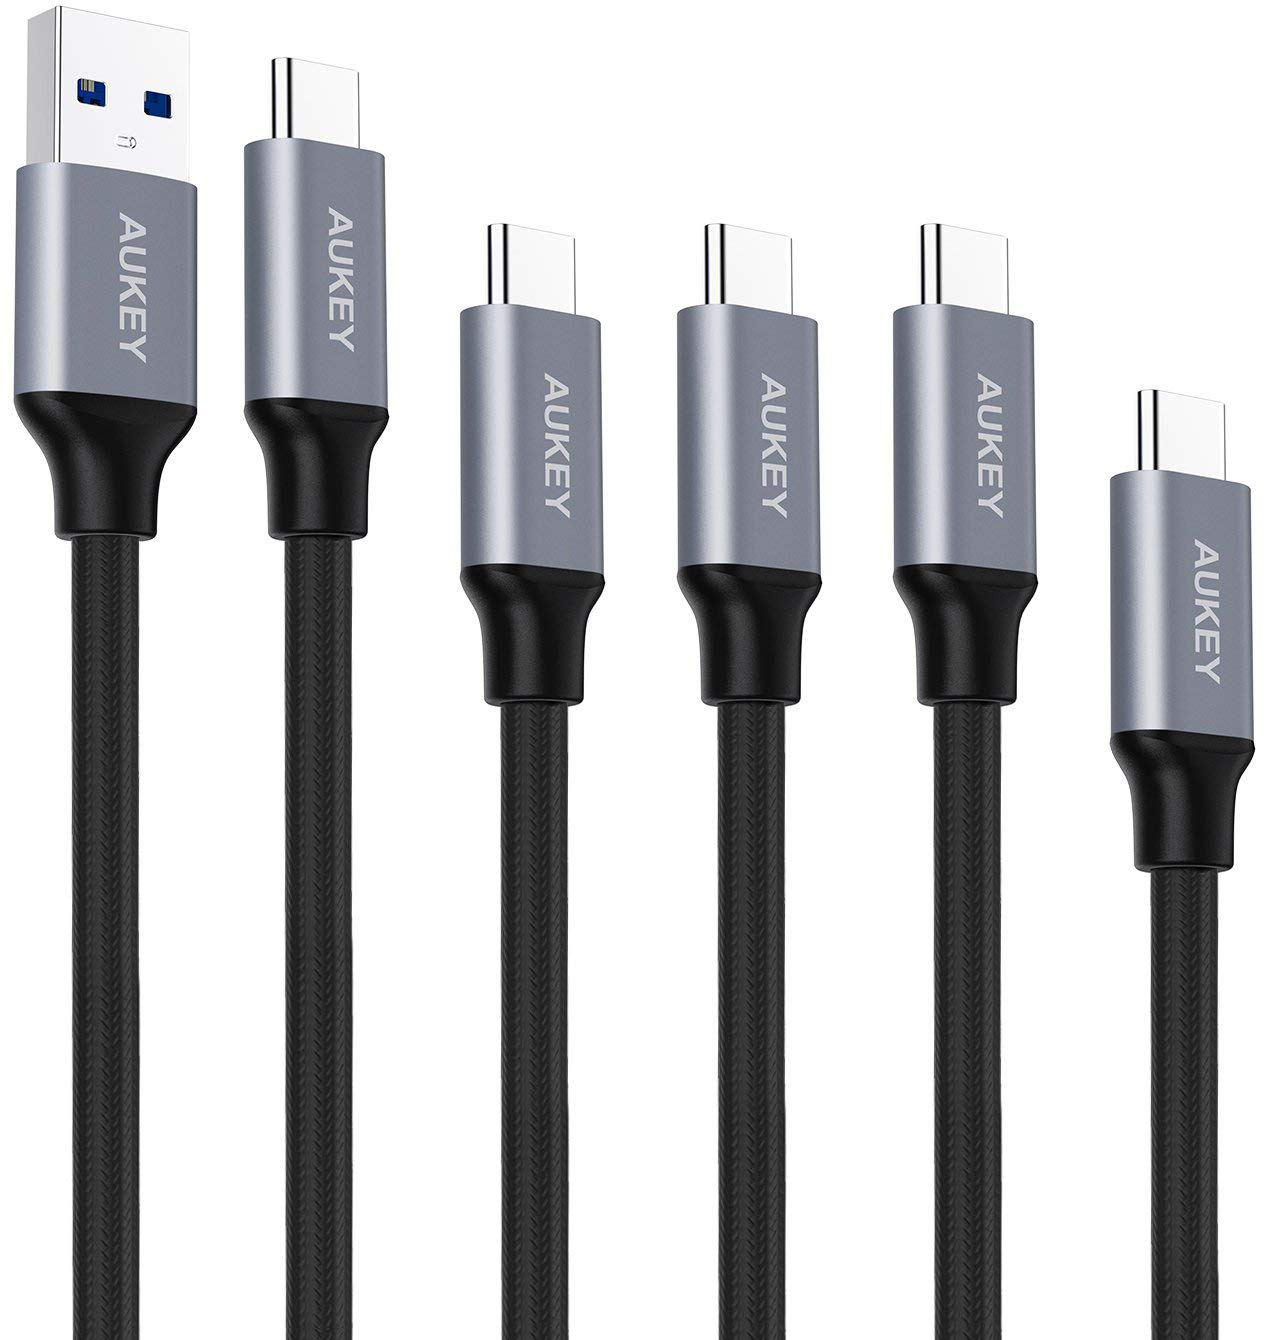 AUKEY ImpulseCable USB-A-to-C bl. CB-CMD2 5Pack 1x2M,3x1M,1x0.3M alu